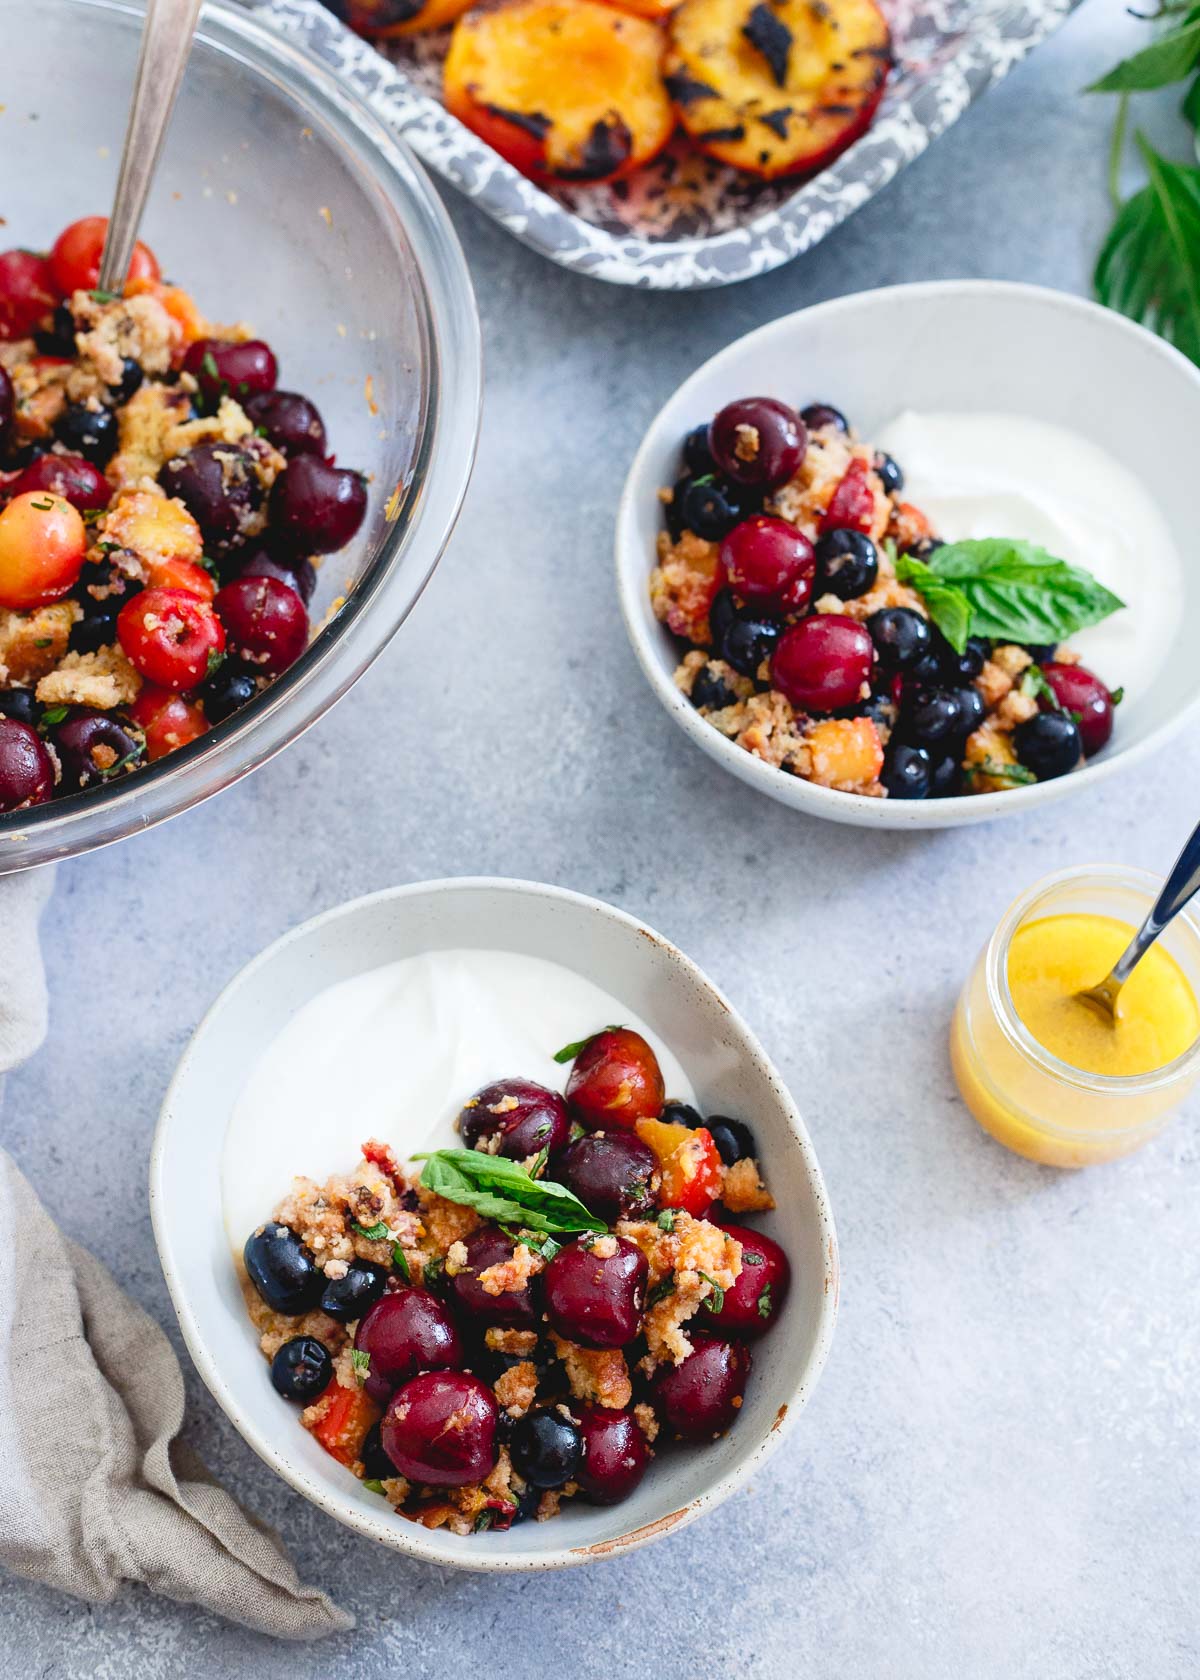 Summer Fruit Panzanella - With Toasted Blueberry Muffins